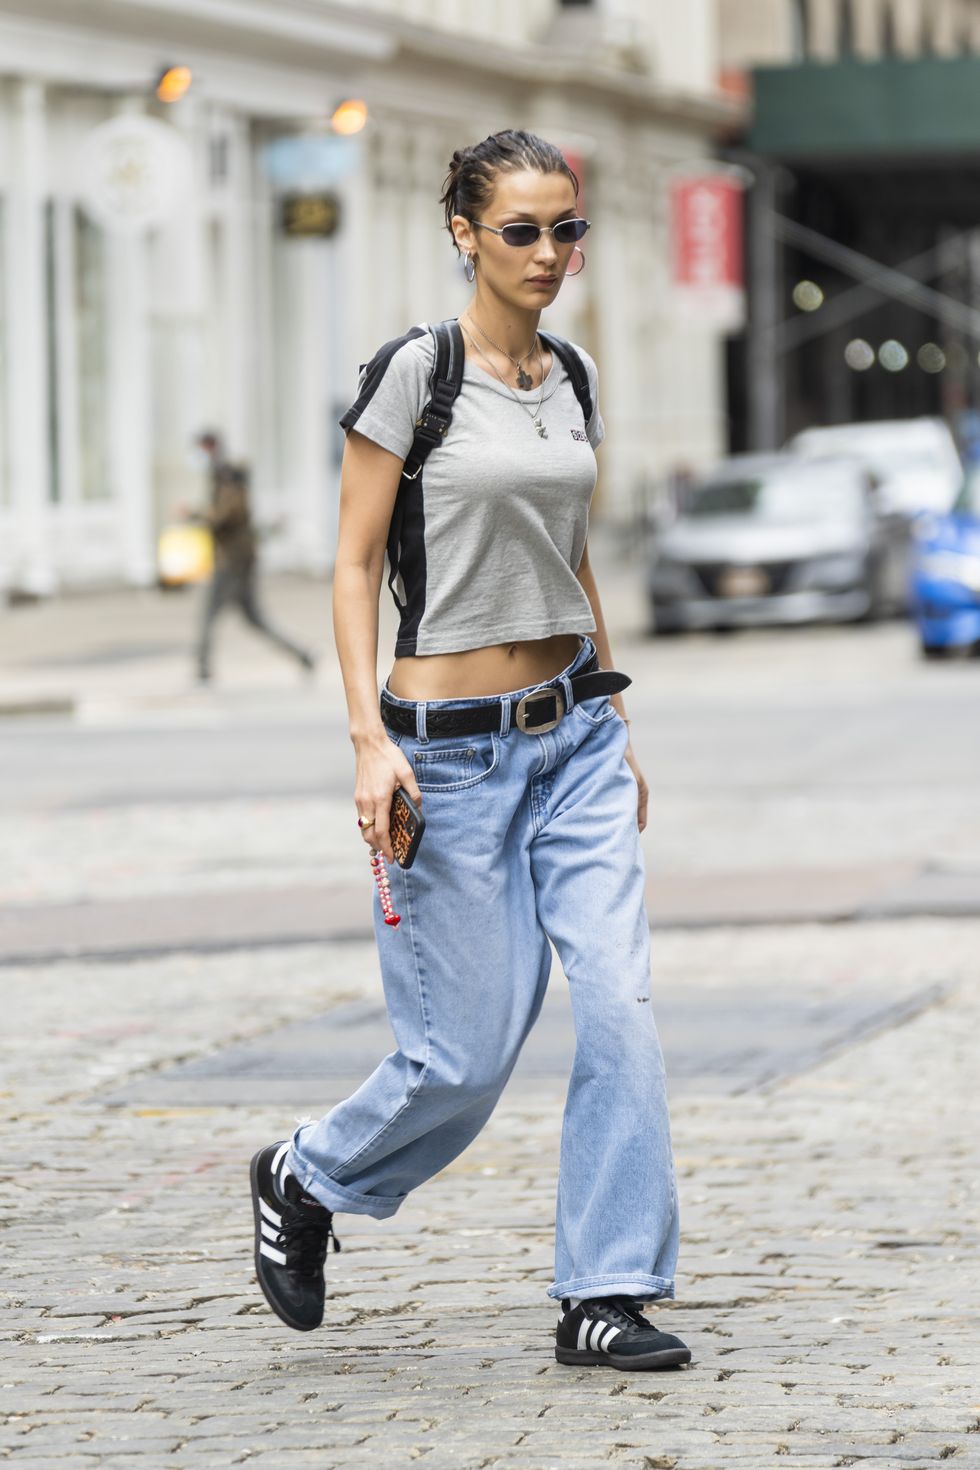 New York, New York, April 24 Bella Hadid spotted in NoHo on April 24, 2022 in New York City, photo by gothamgc images